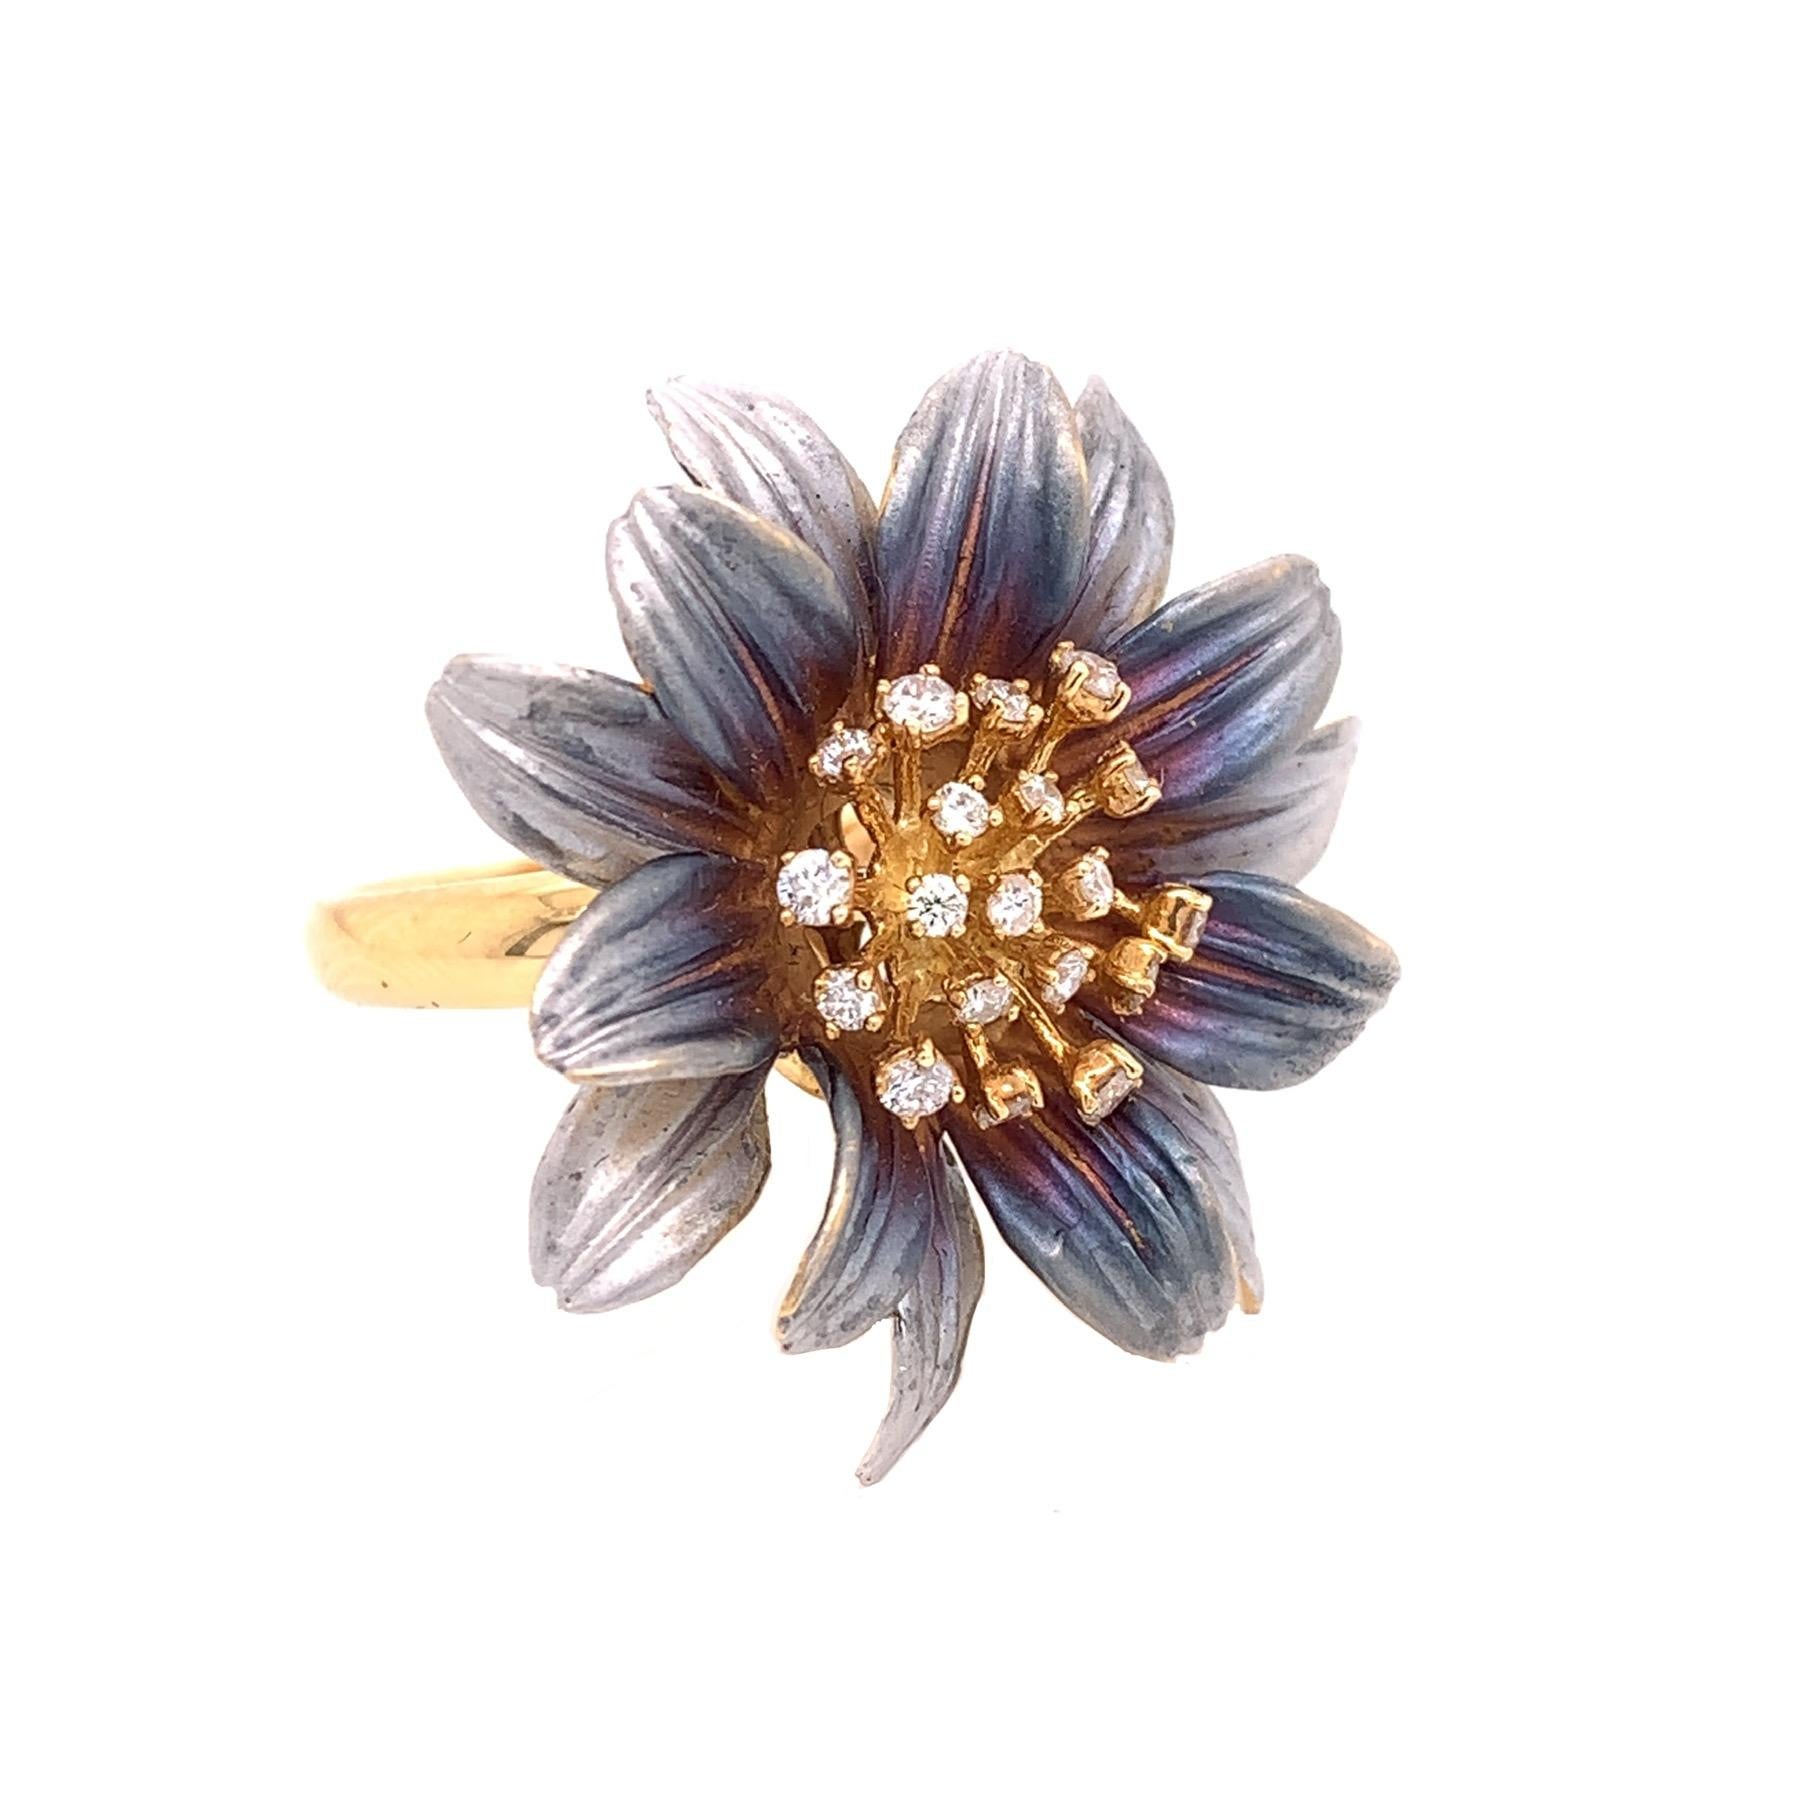 Gray-Brown Collection

Organic flower tainted gray rhodium ring with Diamonds set in 18K yellow gold. US size 6

Diamonds: 0.35ct total weight.
All Diamonds are G-H / SI stones
